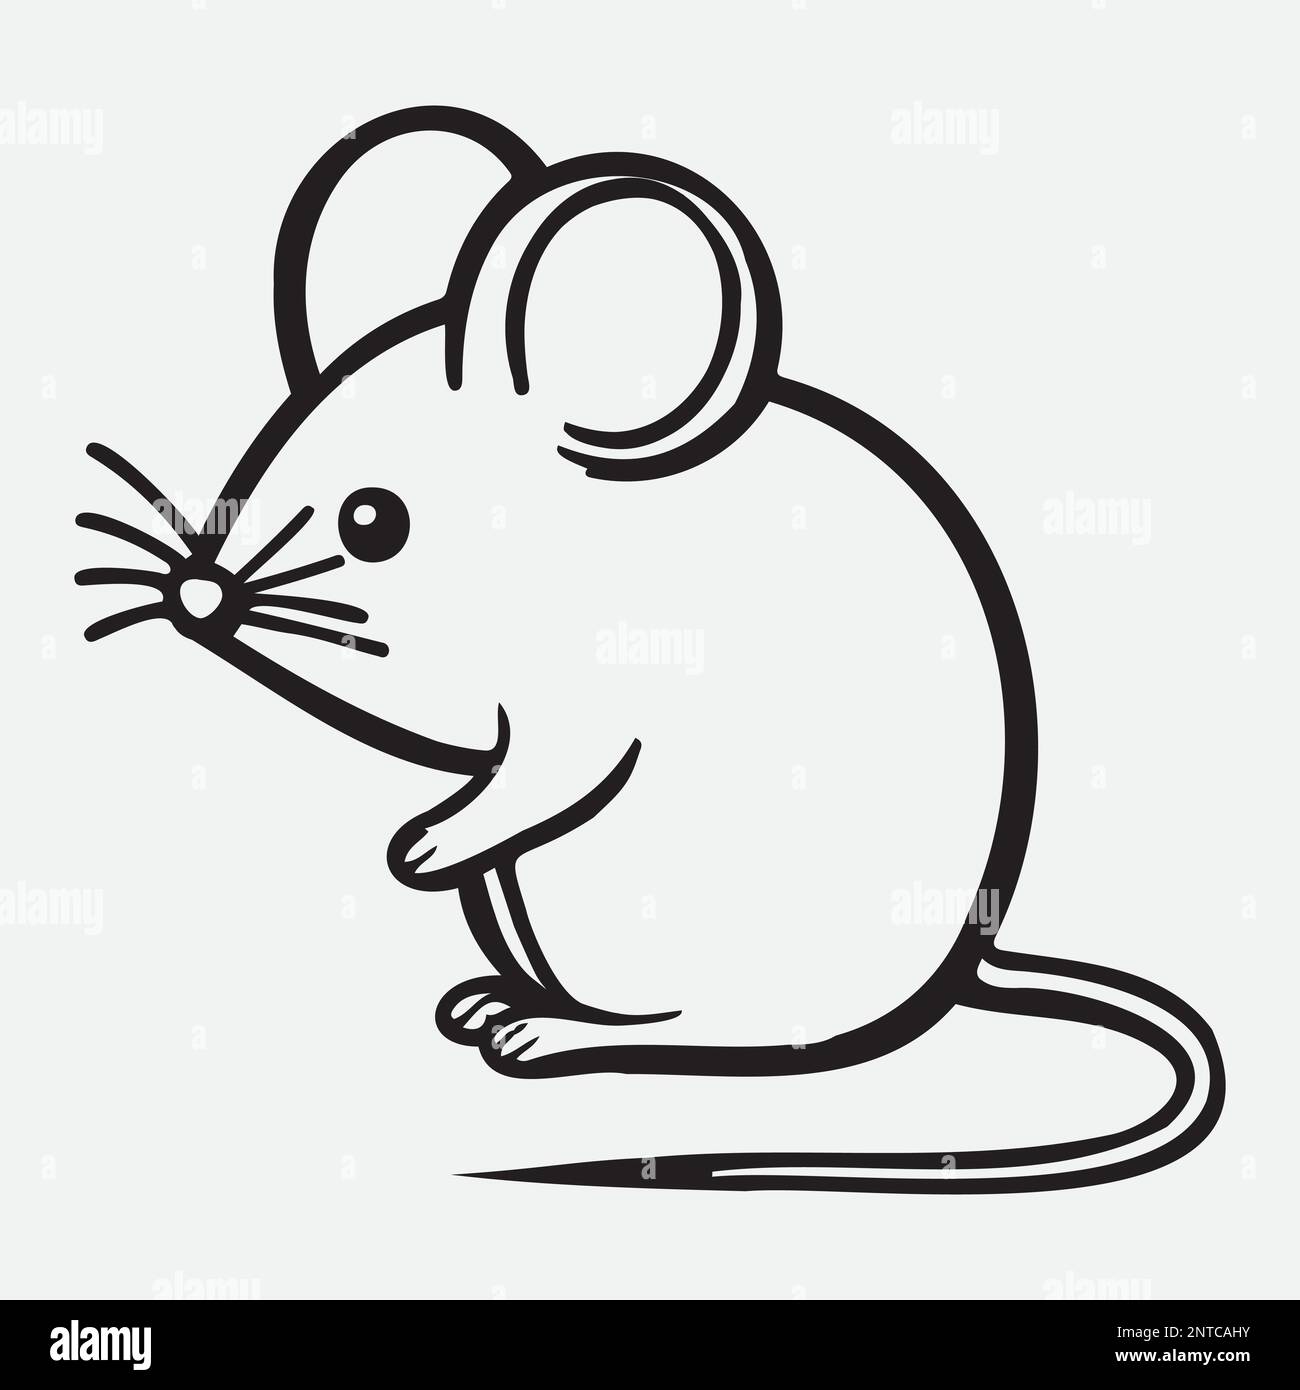 Mouse in linear style, black on a white background.  Stock Vector